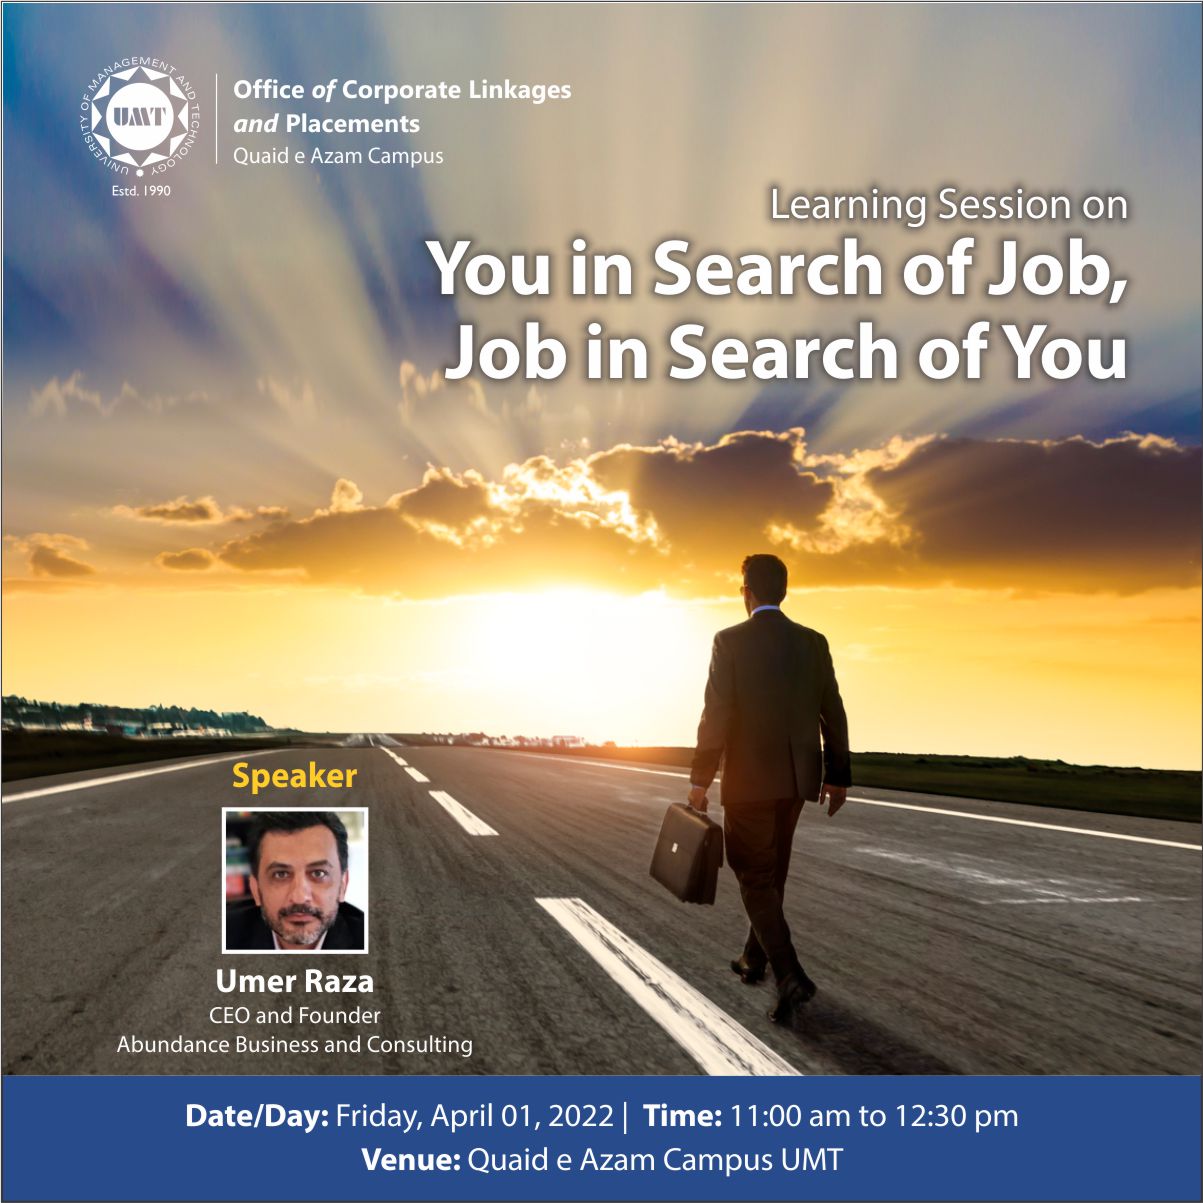 Learning Session on "You in search of JOB in search of you"